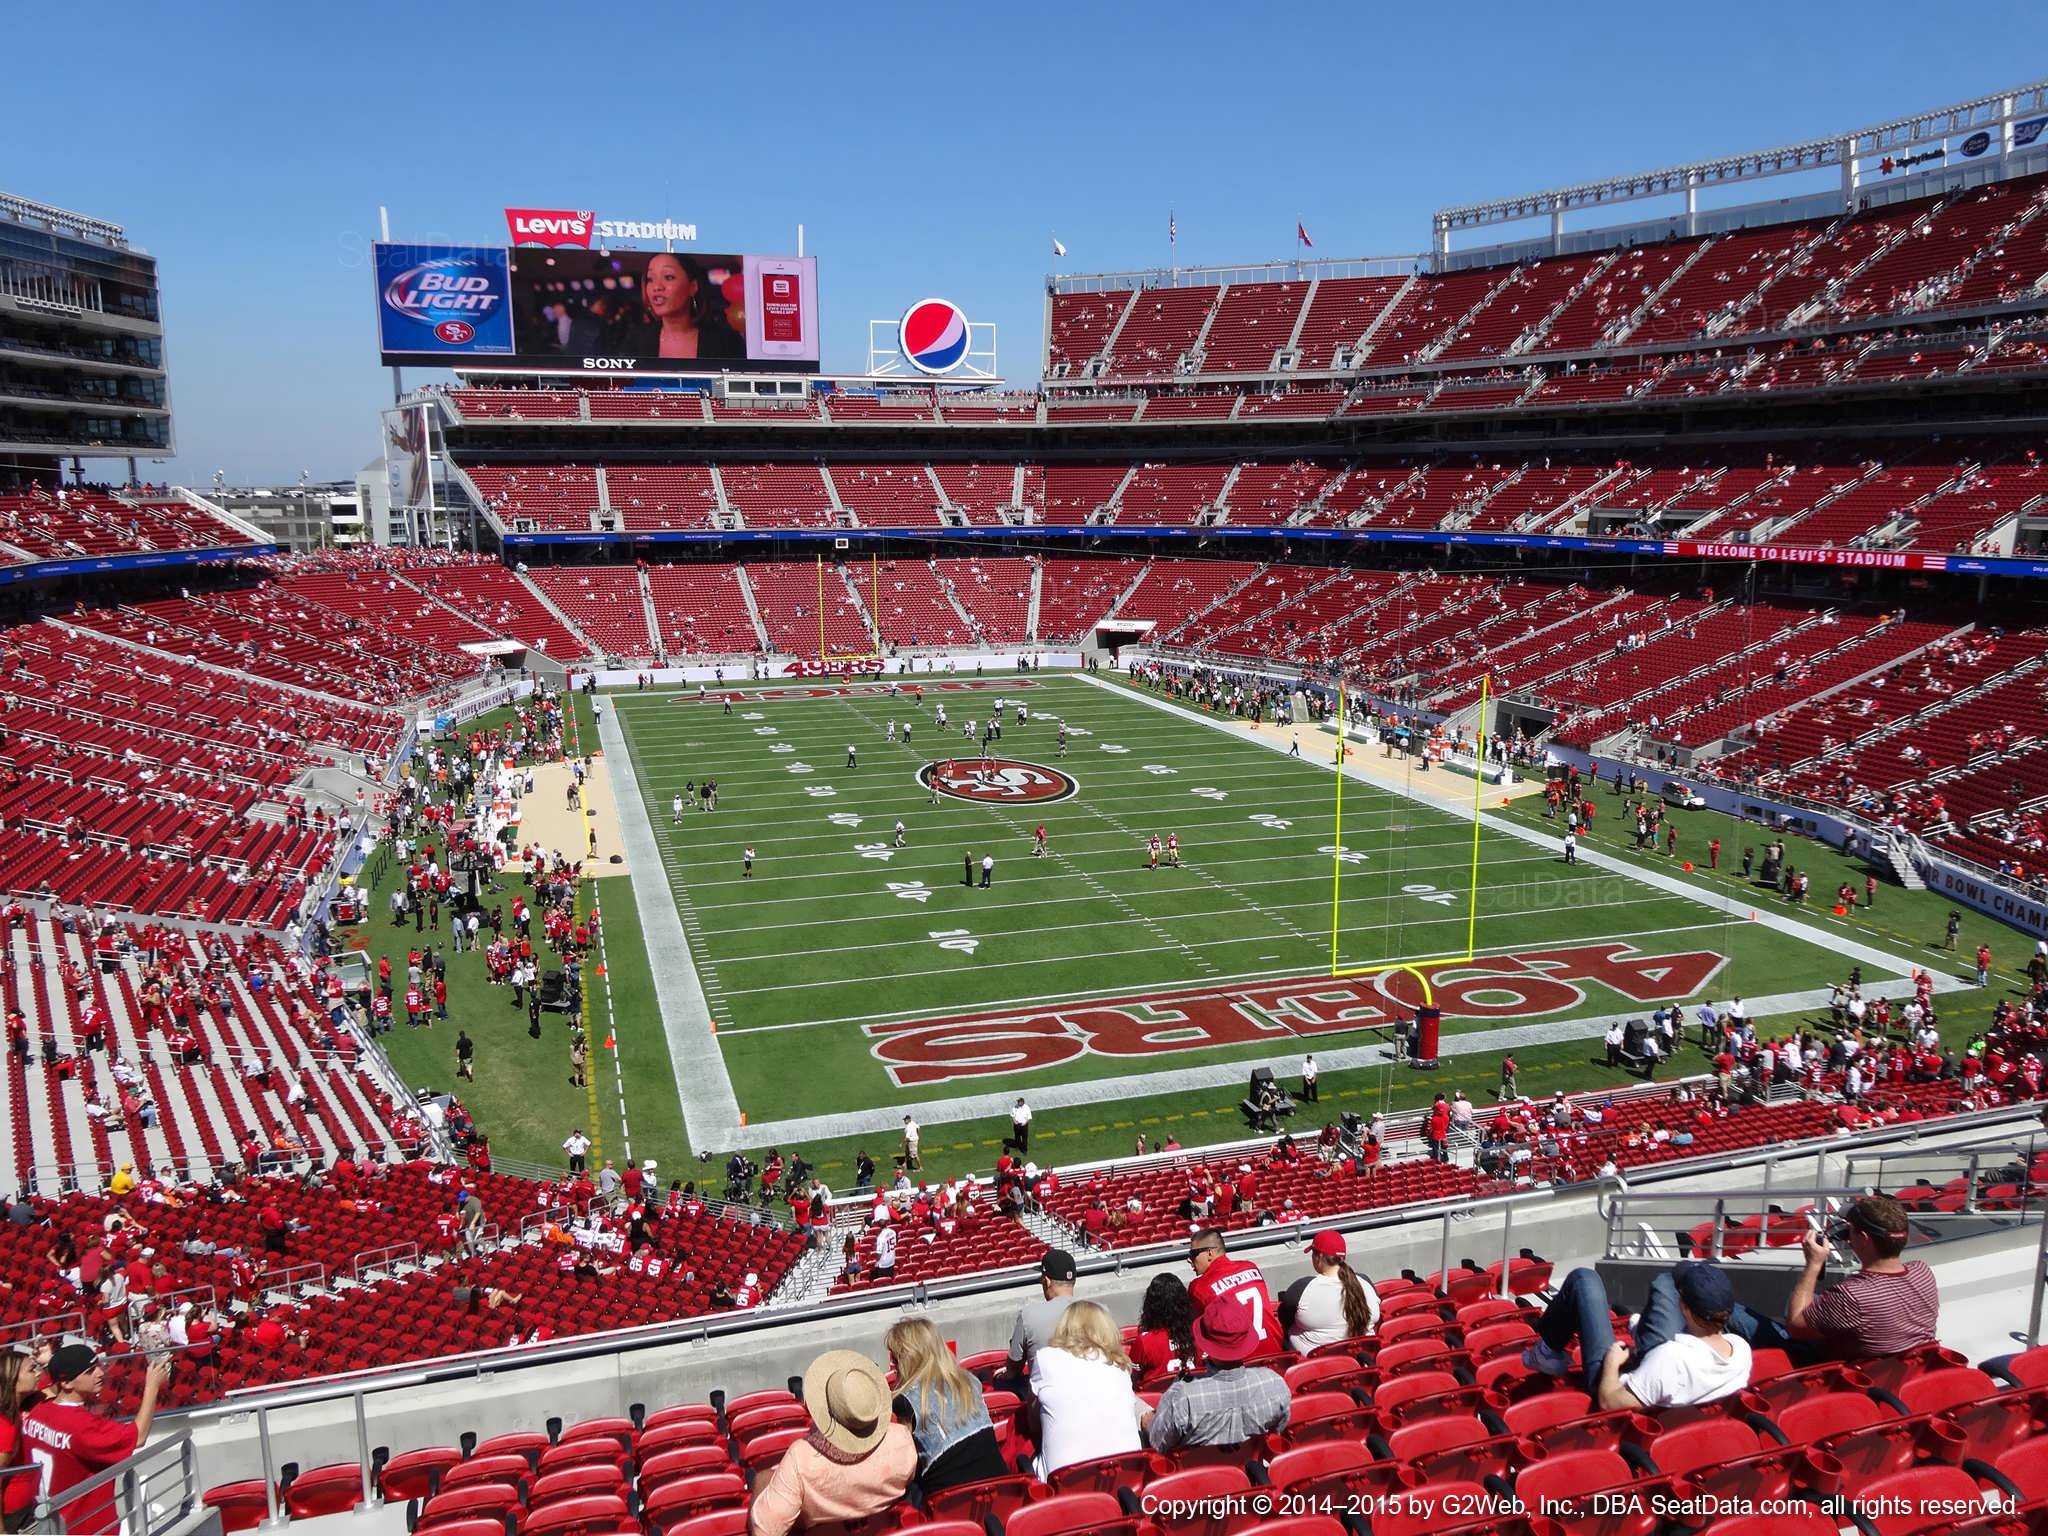 Seat view from section 231 at Levi’s Stadium, home of the San Francisco 49ers